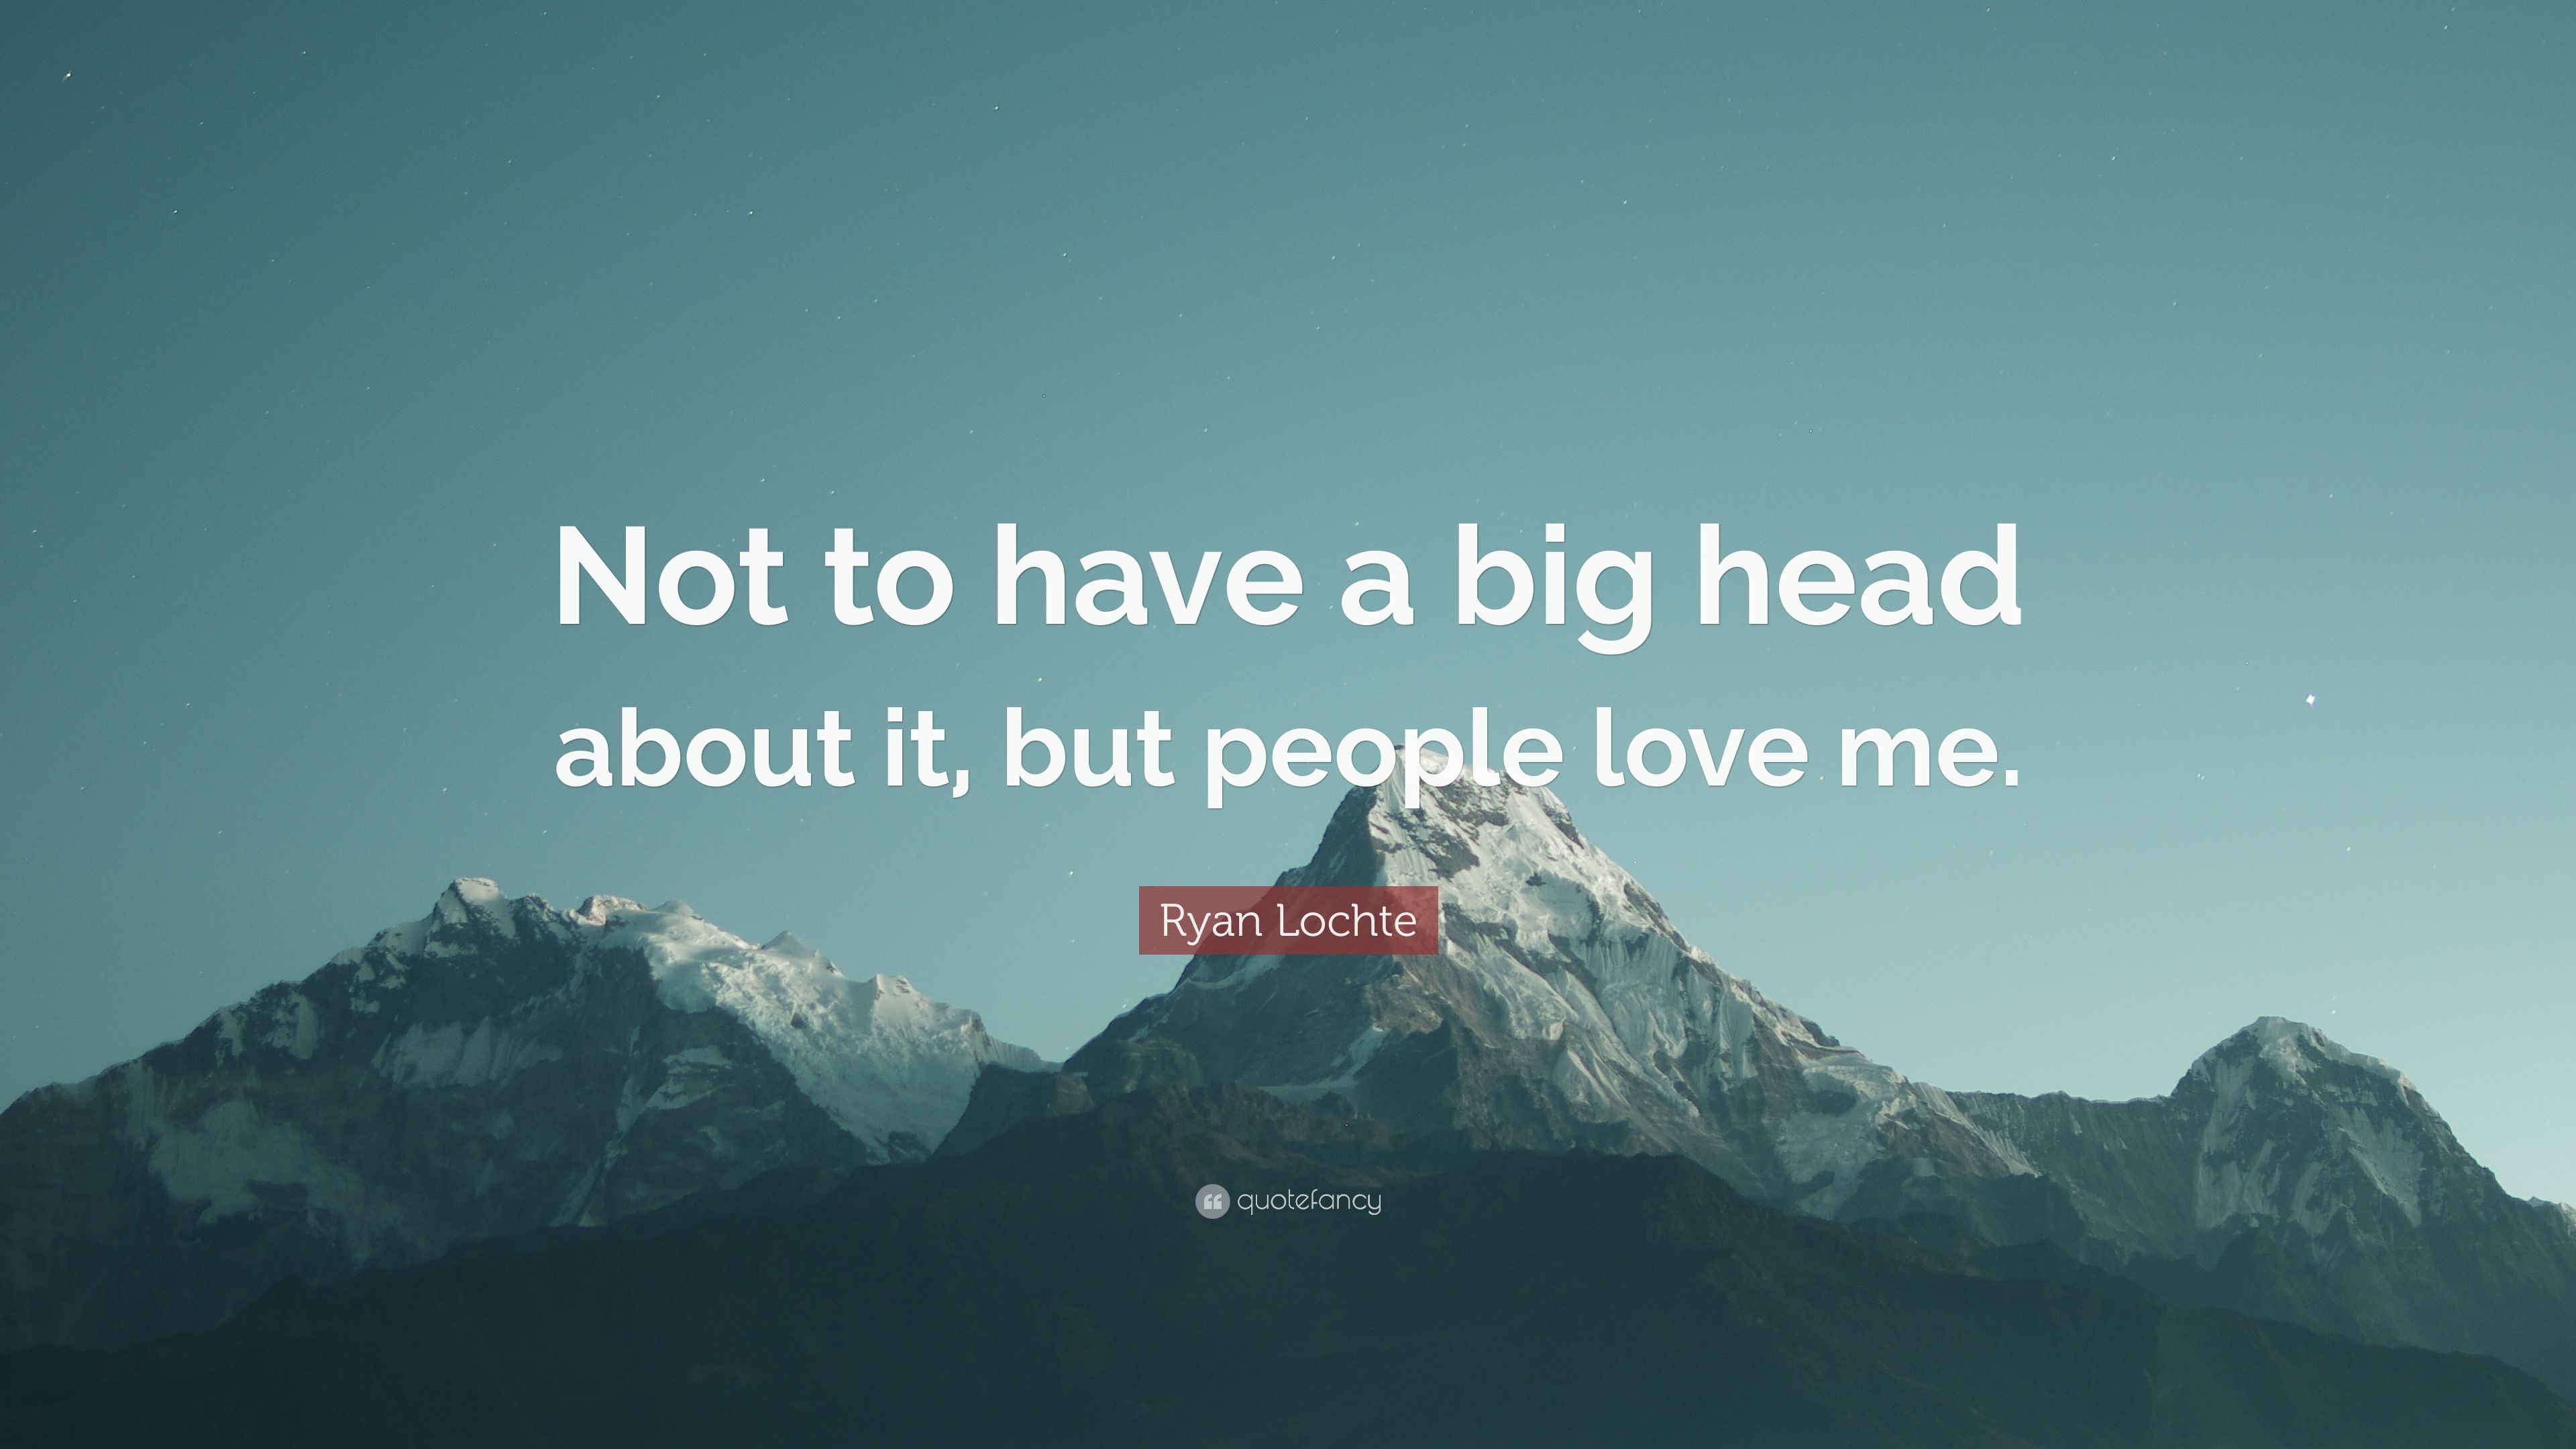 Ryan Lochte Quote: “Not to have a big head about it, but people love me.” (7 wallpaper)